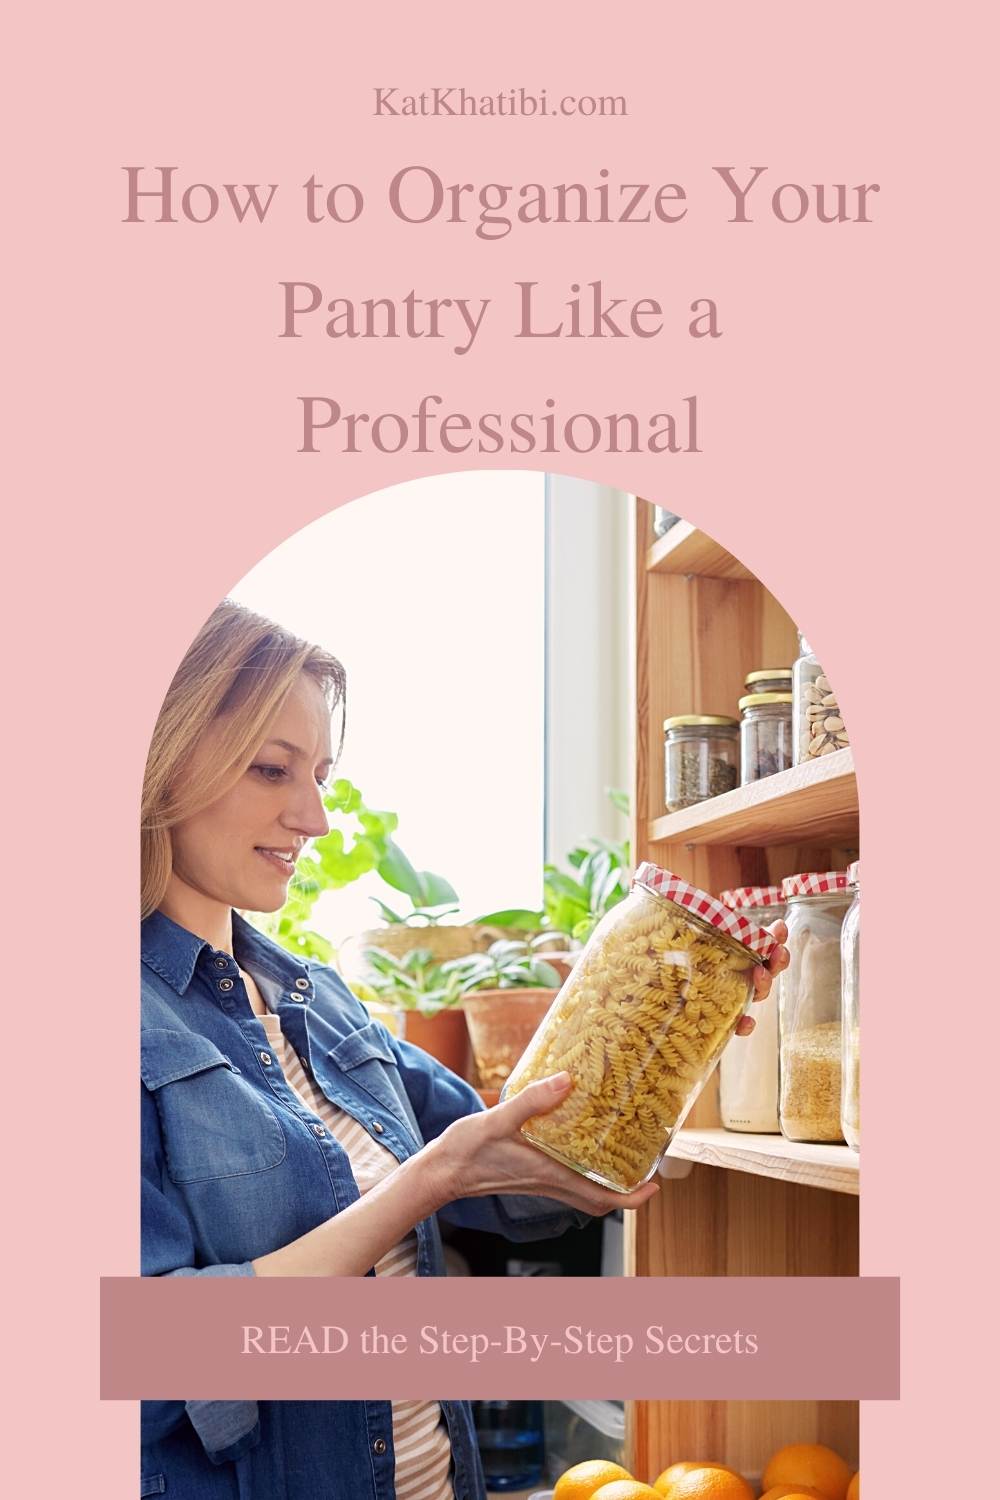 How to Organize Your Pantry Like a Professional